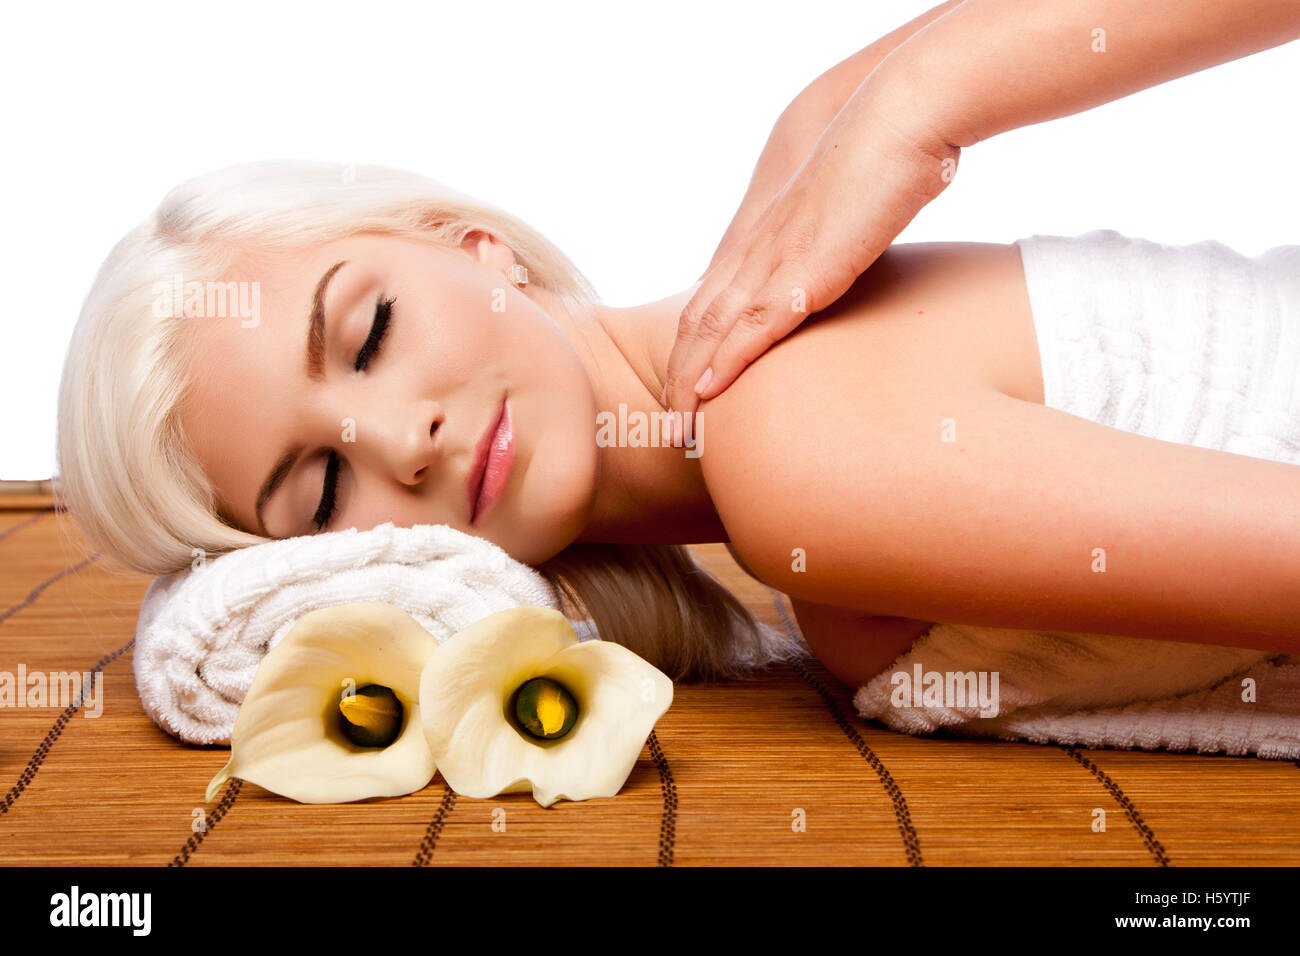 Beautiful young woman relaxing at spa getting therapeutic pampering shoulder massage. Stock Photo